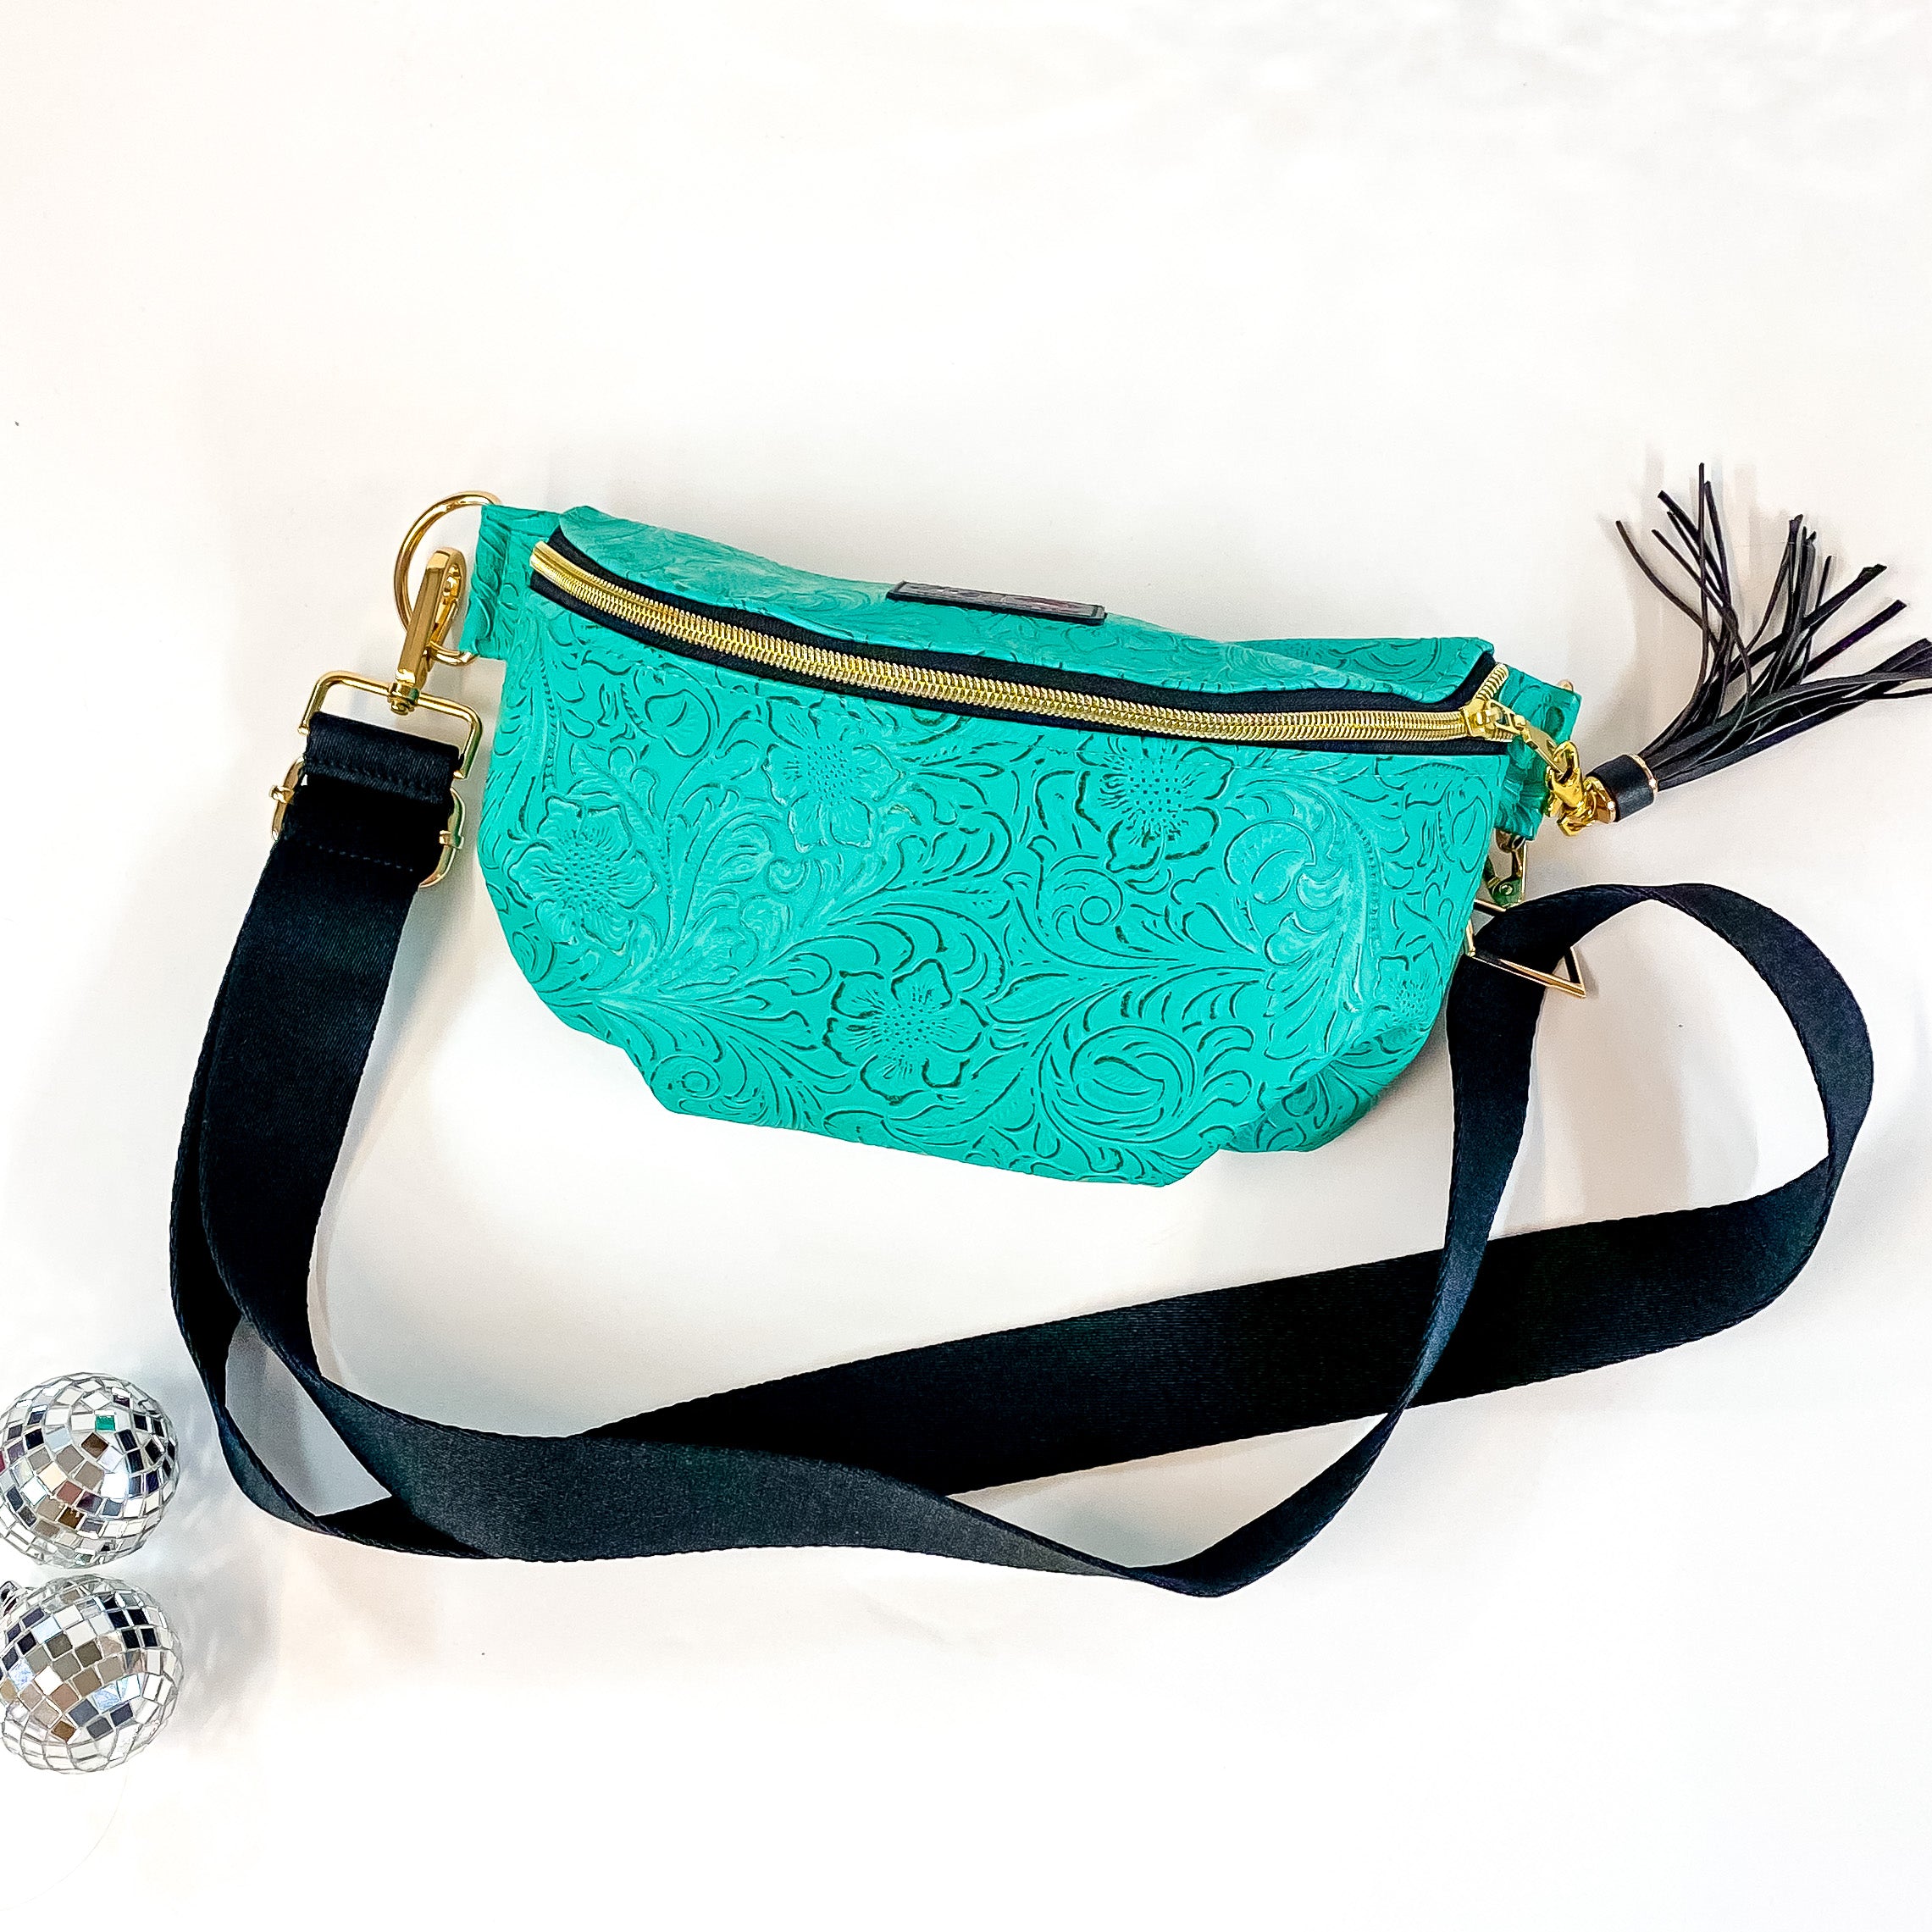 Makeup Junkie | Turquoise Dream Sidekick with Back Zipper in Turquoise Green Tooled Print